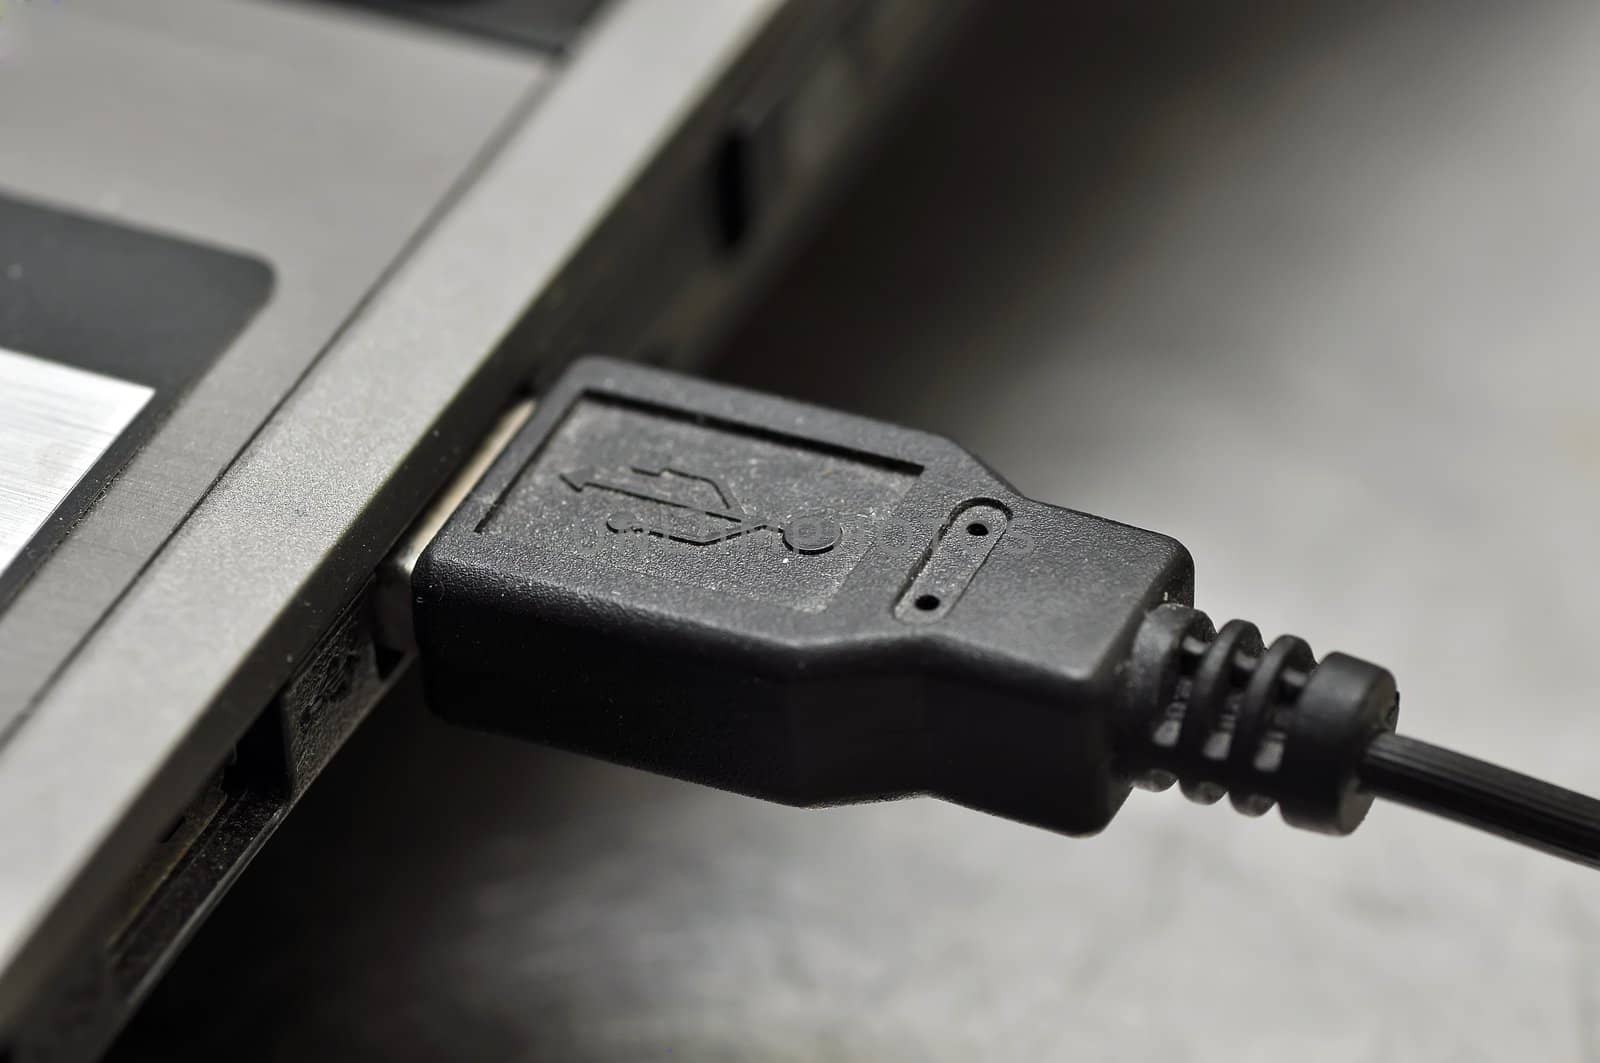 Plug the USB jump drive to a laptop